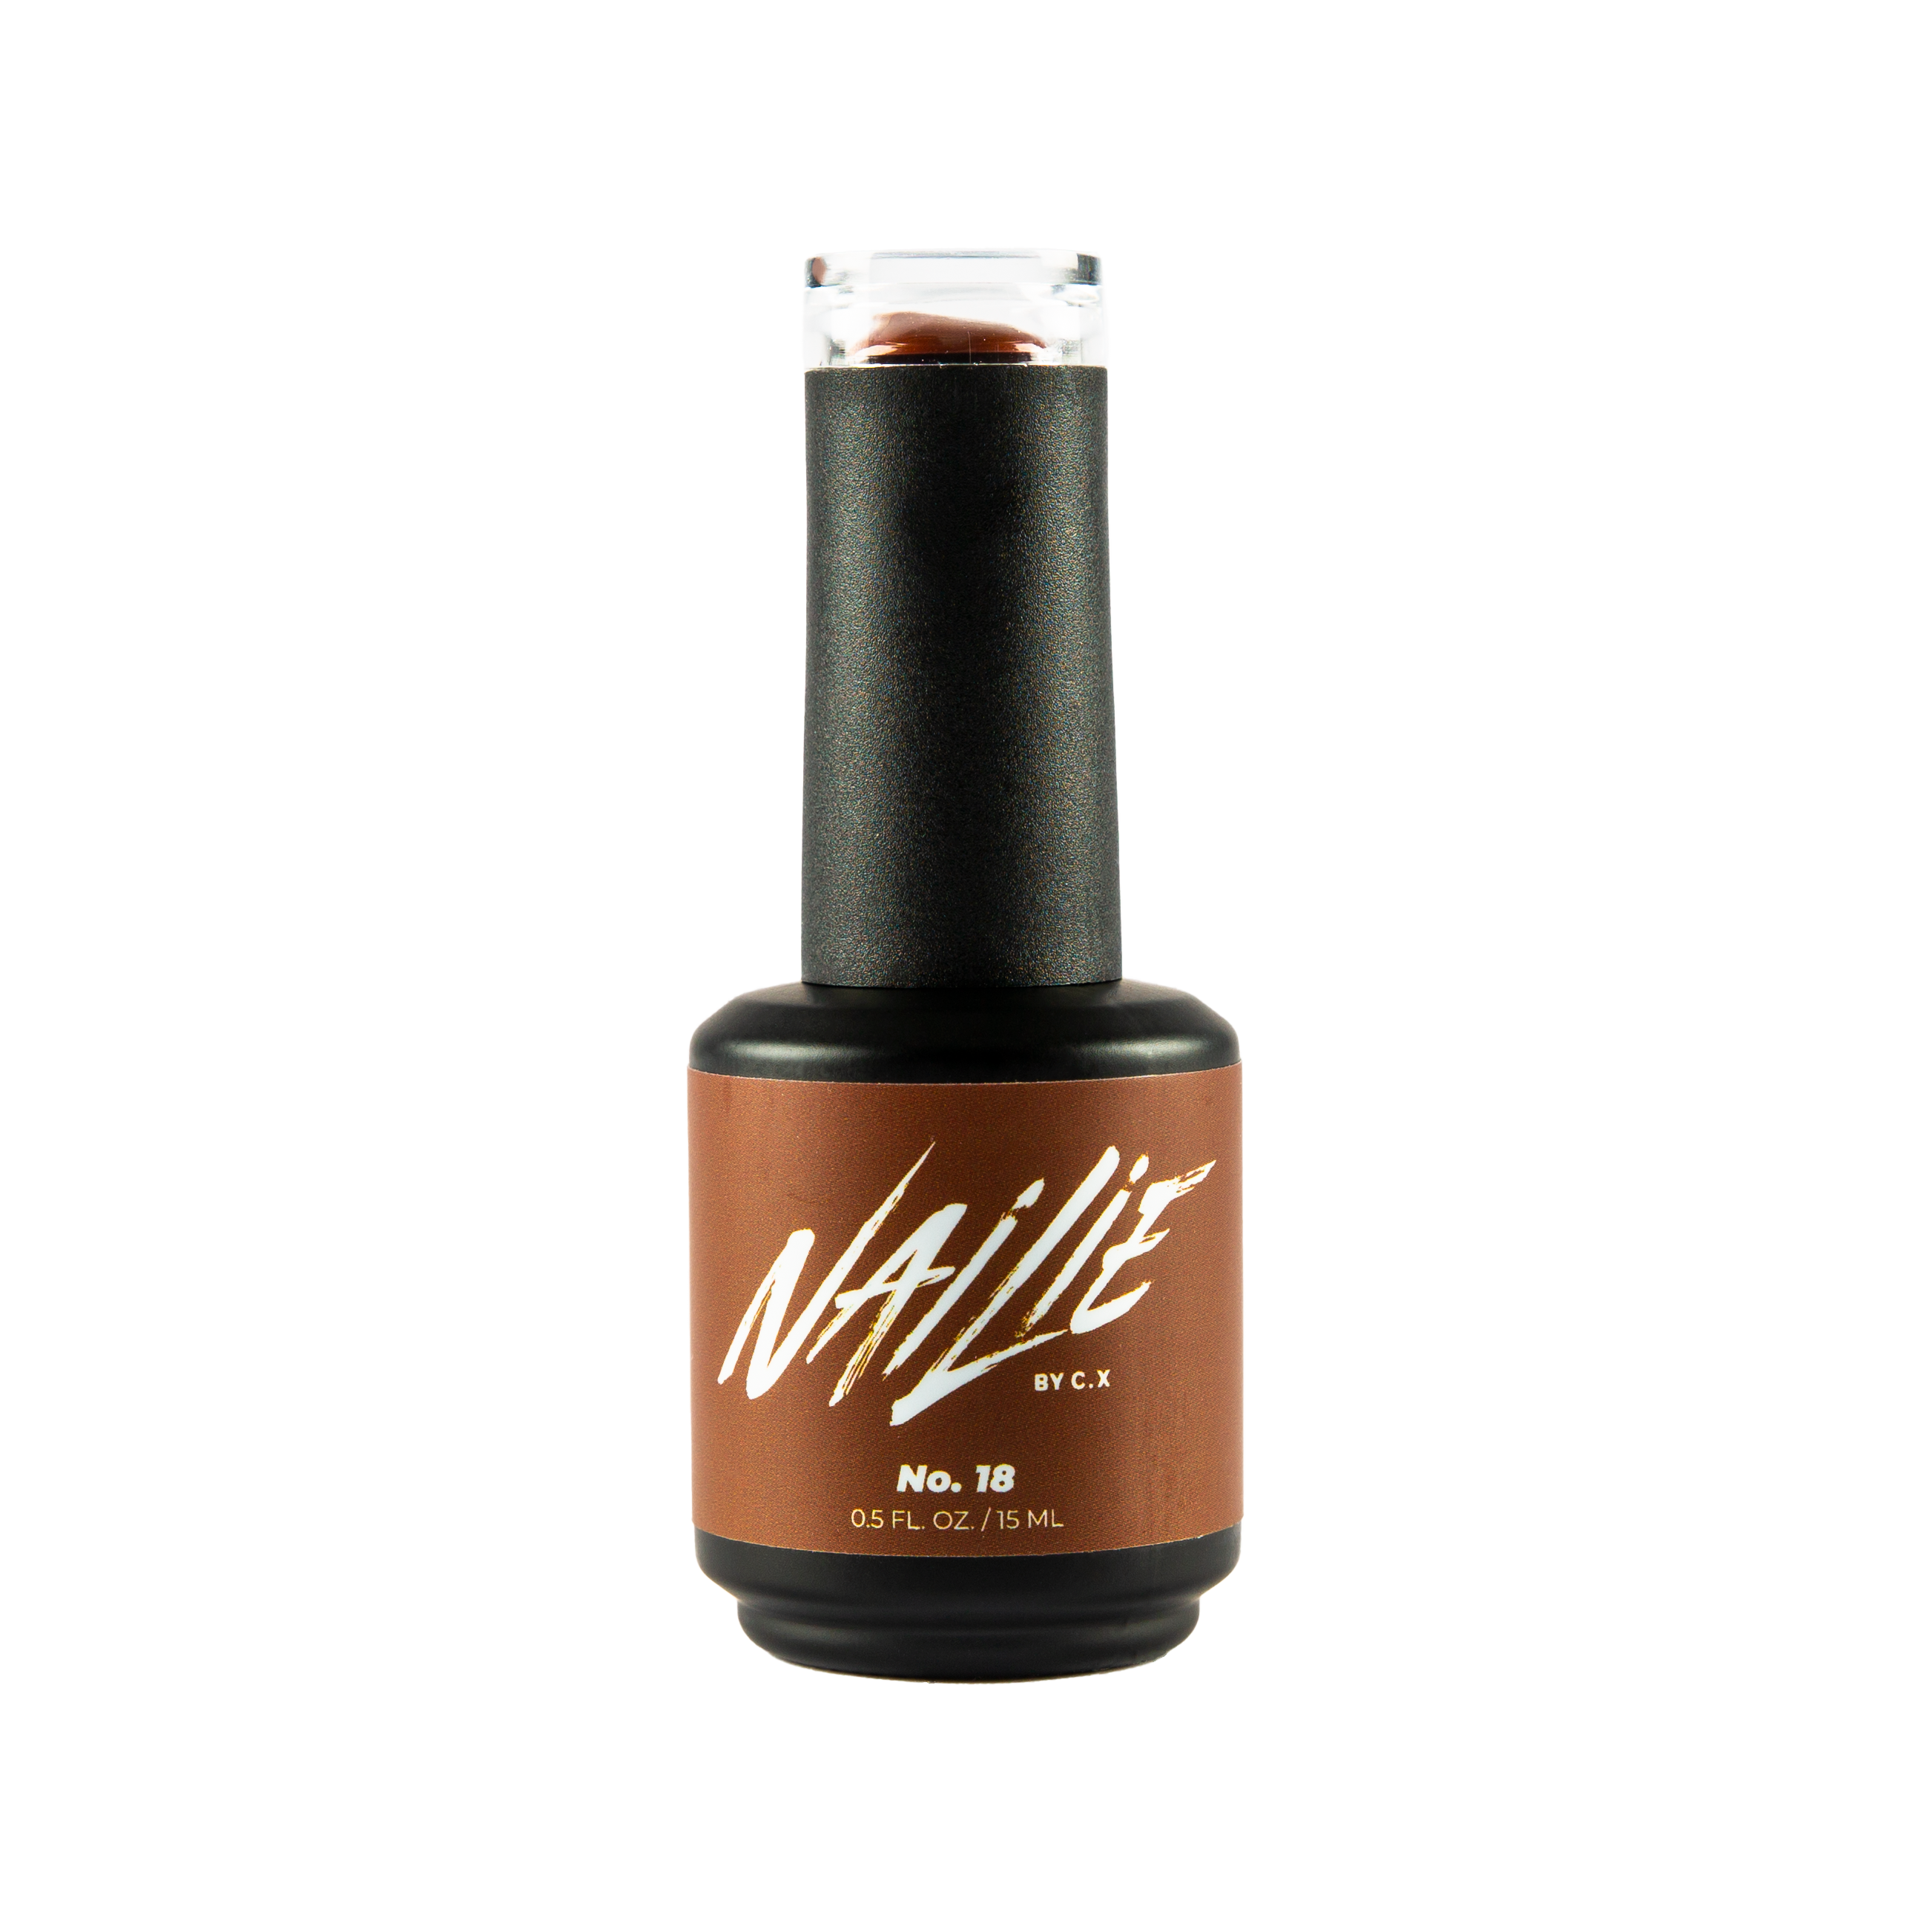 Buy Beromt Chocolate Candy Brown Matte Sugar Crush Nail Polish, Vegan,  Cruelty-free, Non-Toxic, Safe Fast Dry, Nail Art, Crushed Texture effect,  Best Matte Sugar Nail Polish, 8ml-616 Online at Low Prices in